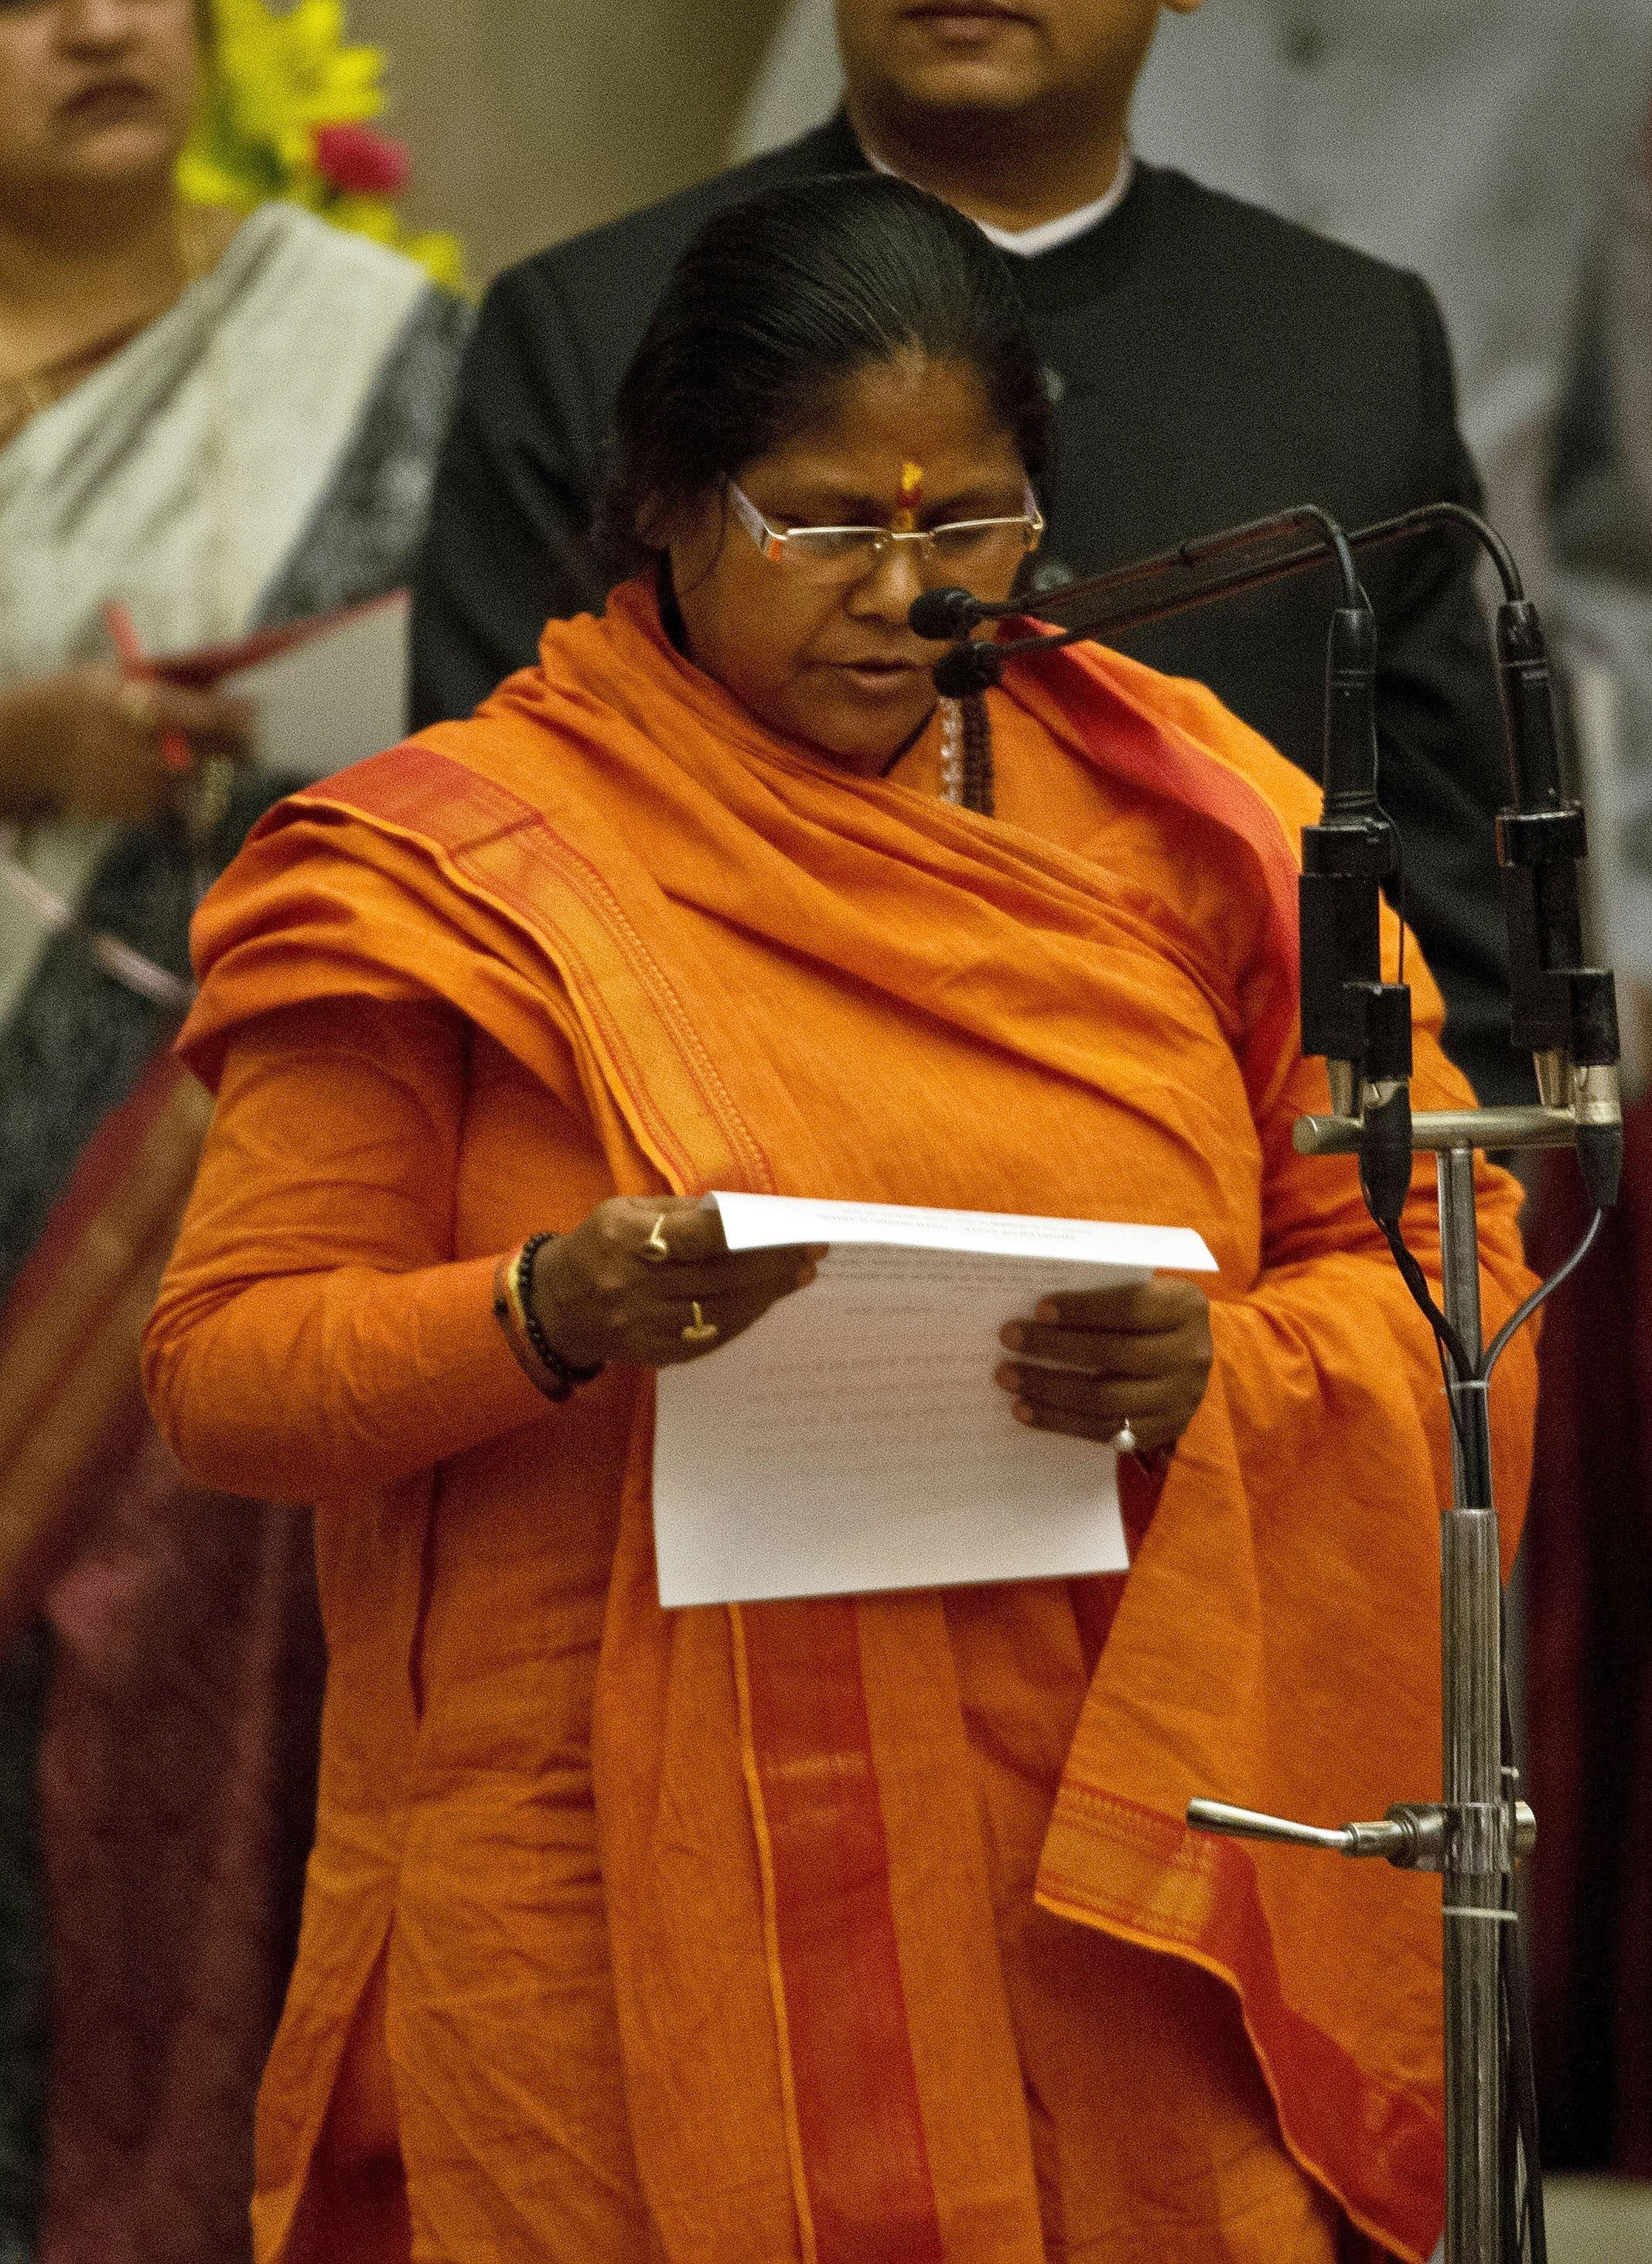 Bharatiya Janata Party leader Niranjan Jyoti takes an oath as a Cabinet minister during a swearing-in ceremony at the presidential palace in New Delhi on Nov. 9, 2014 (Prakash Singh/Pool—EPA)